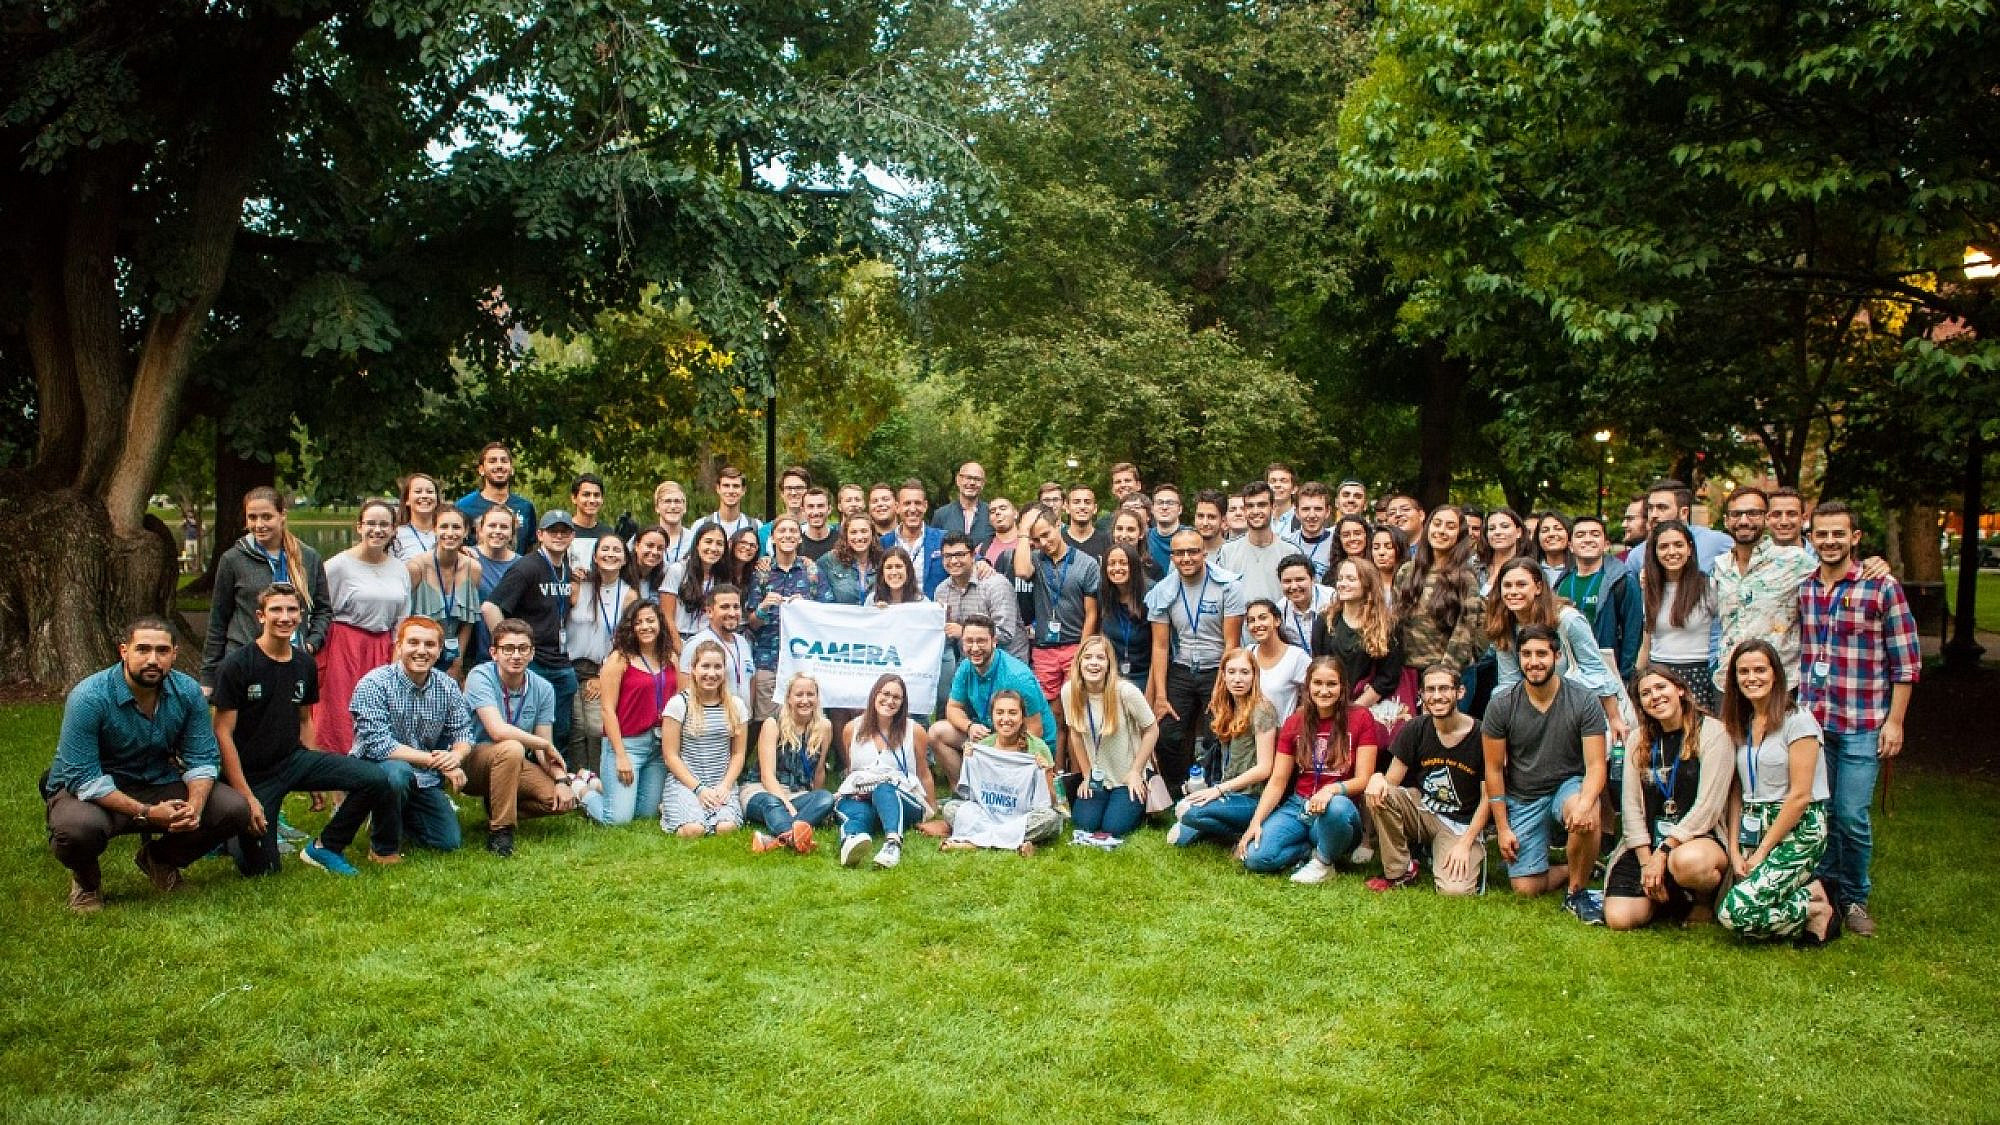 More than 80 students from 70 different campuses attended the 2018 CAMERA Conference to learn tools on addressing anti-Israel sentiment on college campuses. Credit: CAMERA on Campus.